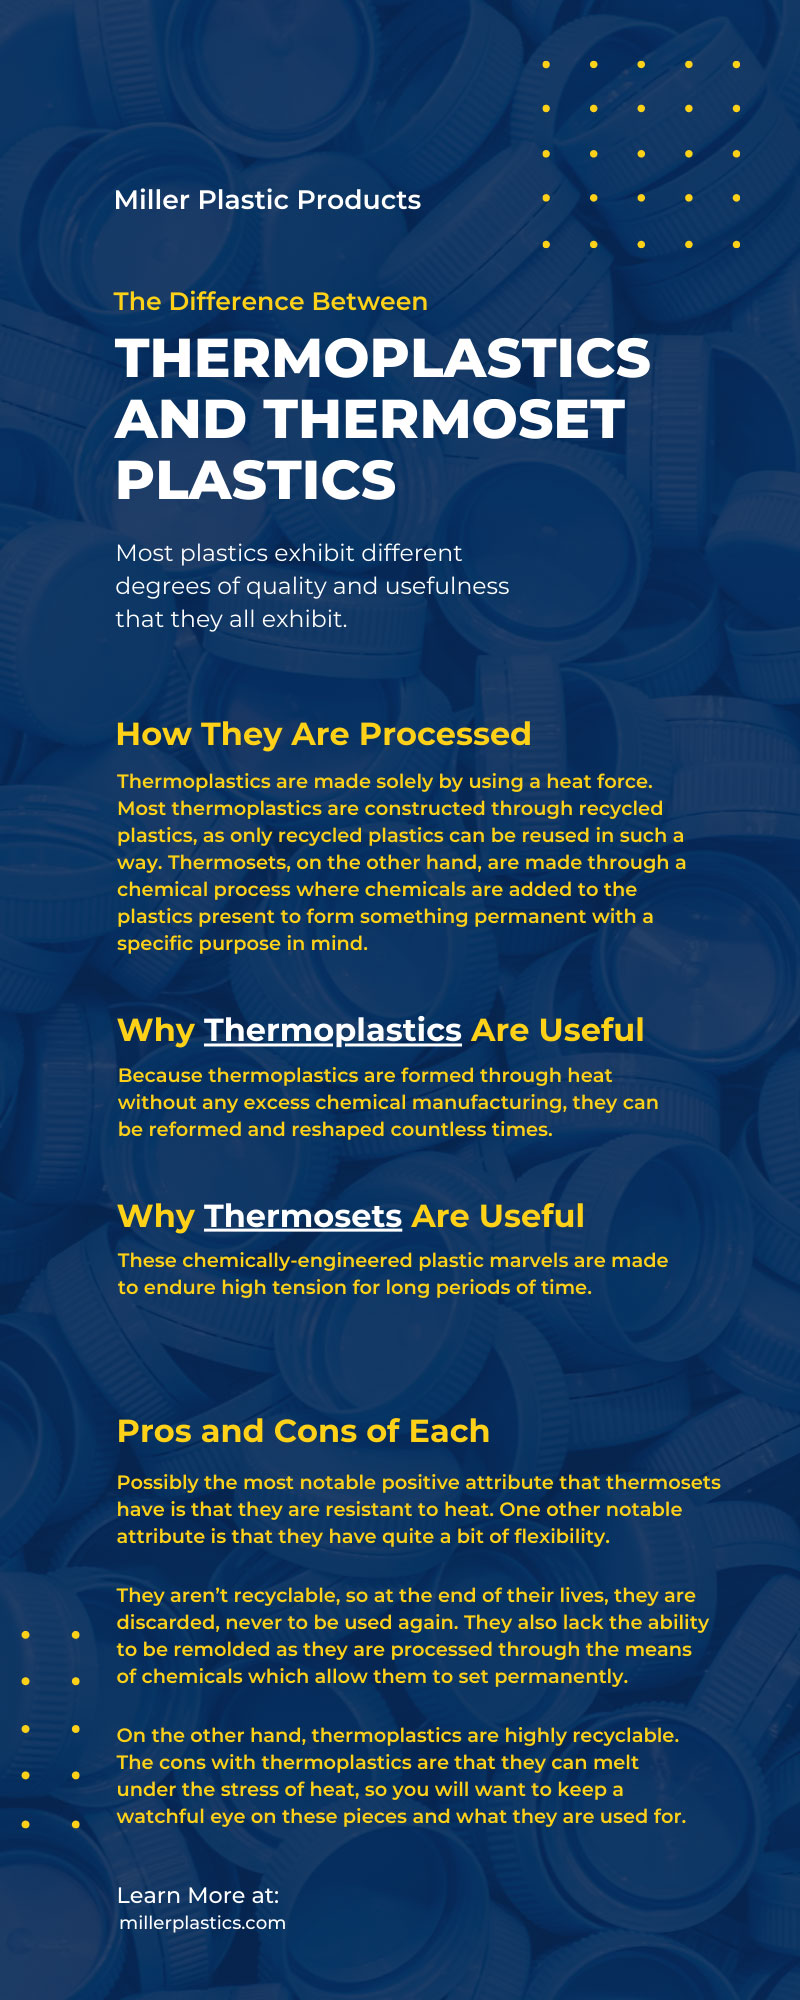 Thermosets and Thermoplastics: Definition and Differences